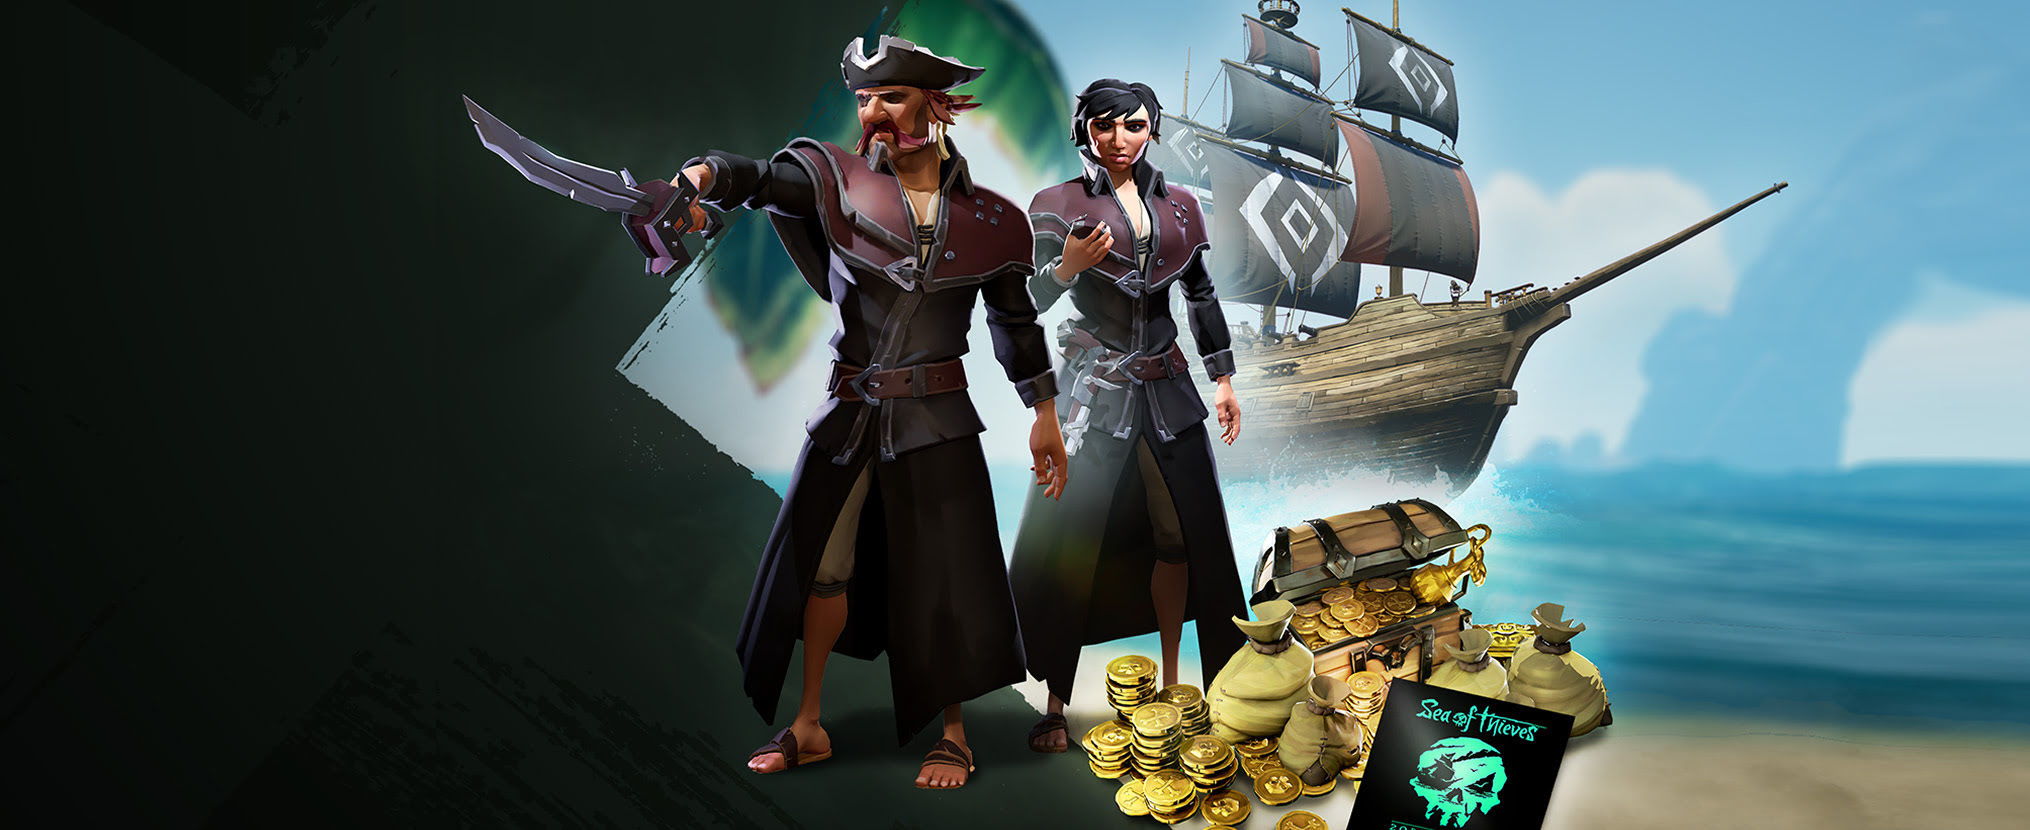 Sea of Thieves PLAYSTATION. Sea of Thieves рыбалка. Карта рыбалки Sea of Thieves. Sea of Thieves Deluxe Edition. Sea of thieves ps4